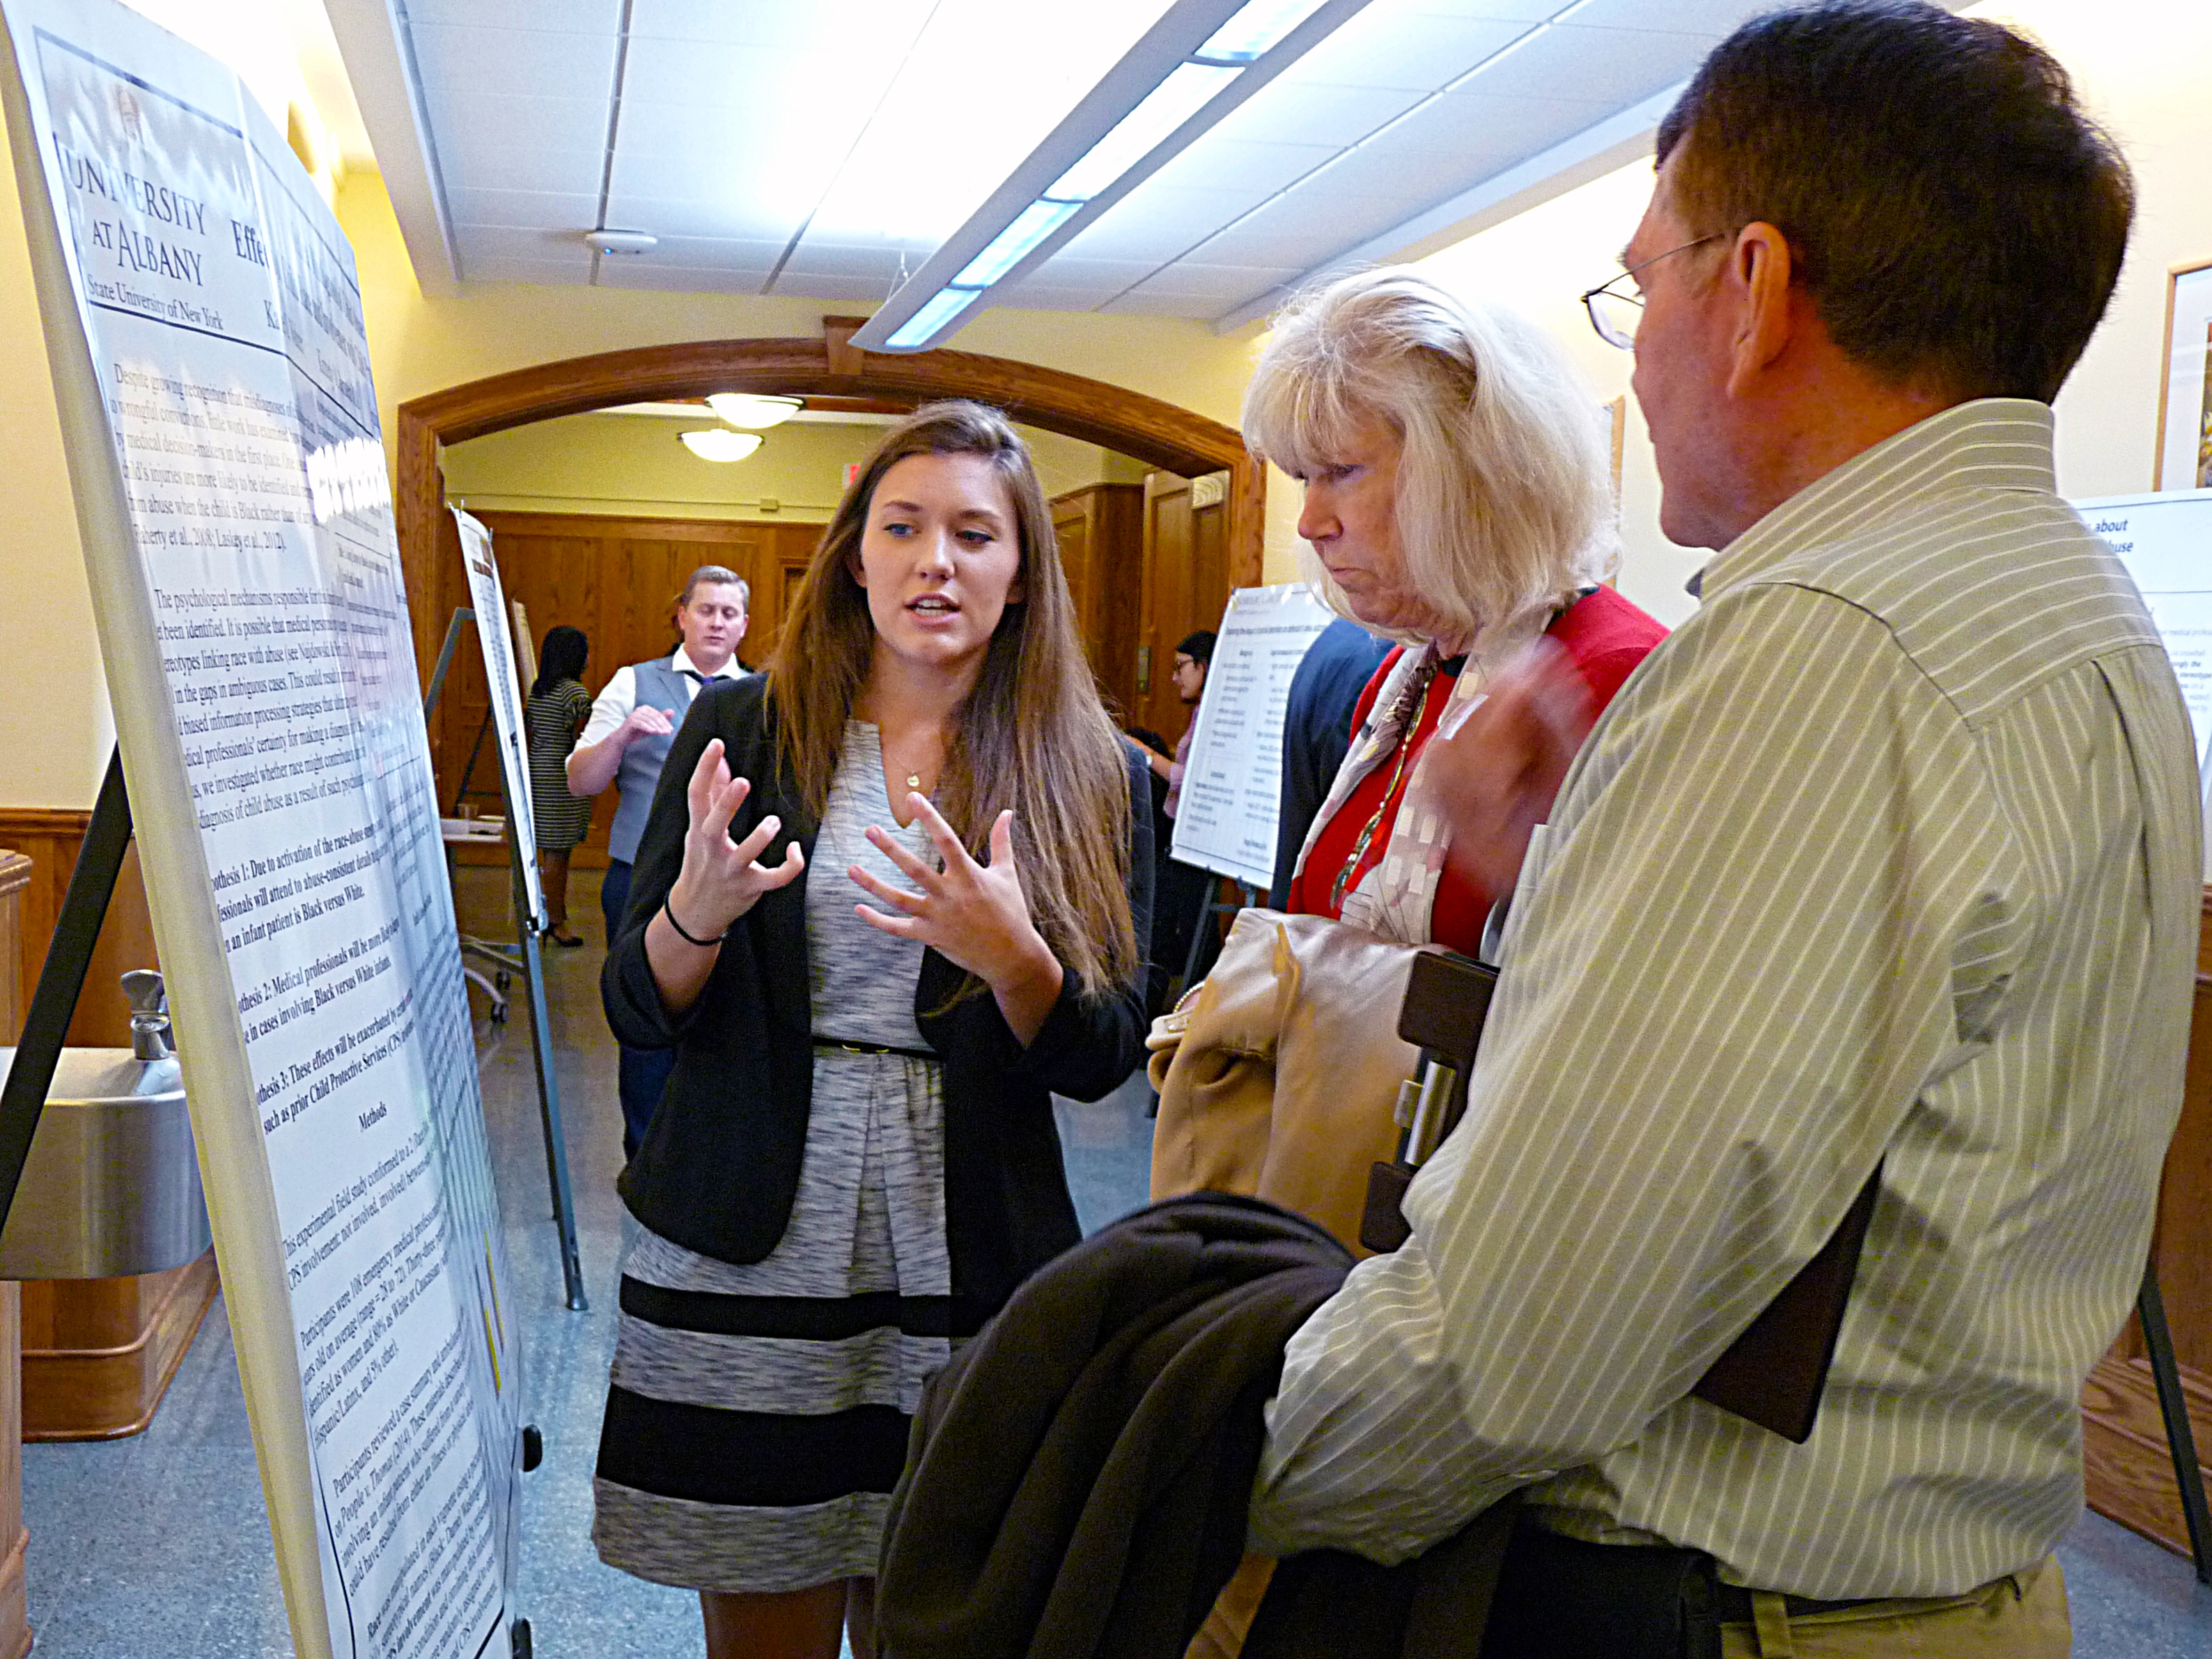 A criminal justice student explains her research during a poster session